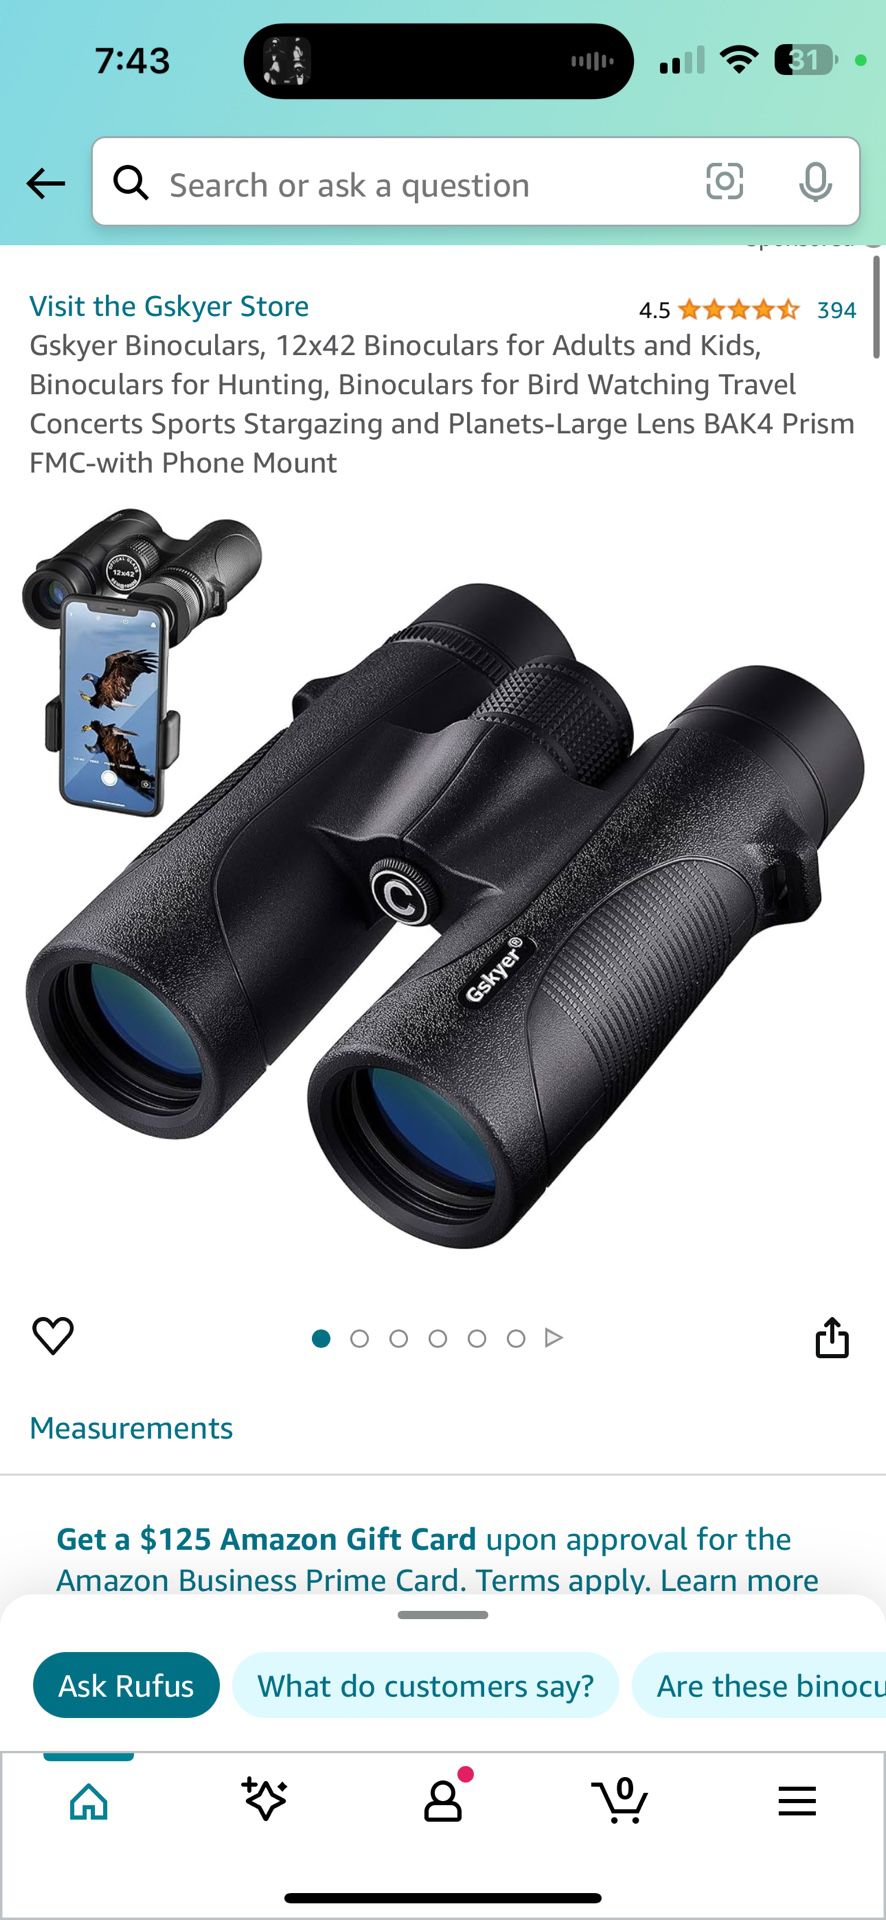 Gskyer Binoculars, 12x42 Binoculars for Adults and Kids, Binoculars for Hunting, Binoculars for Bird Watching Travel Concerts Sports Stargazing and Pl